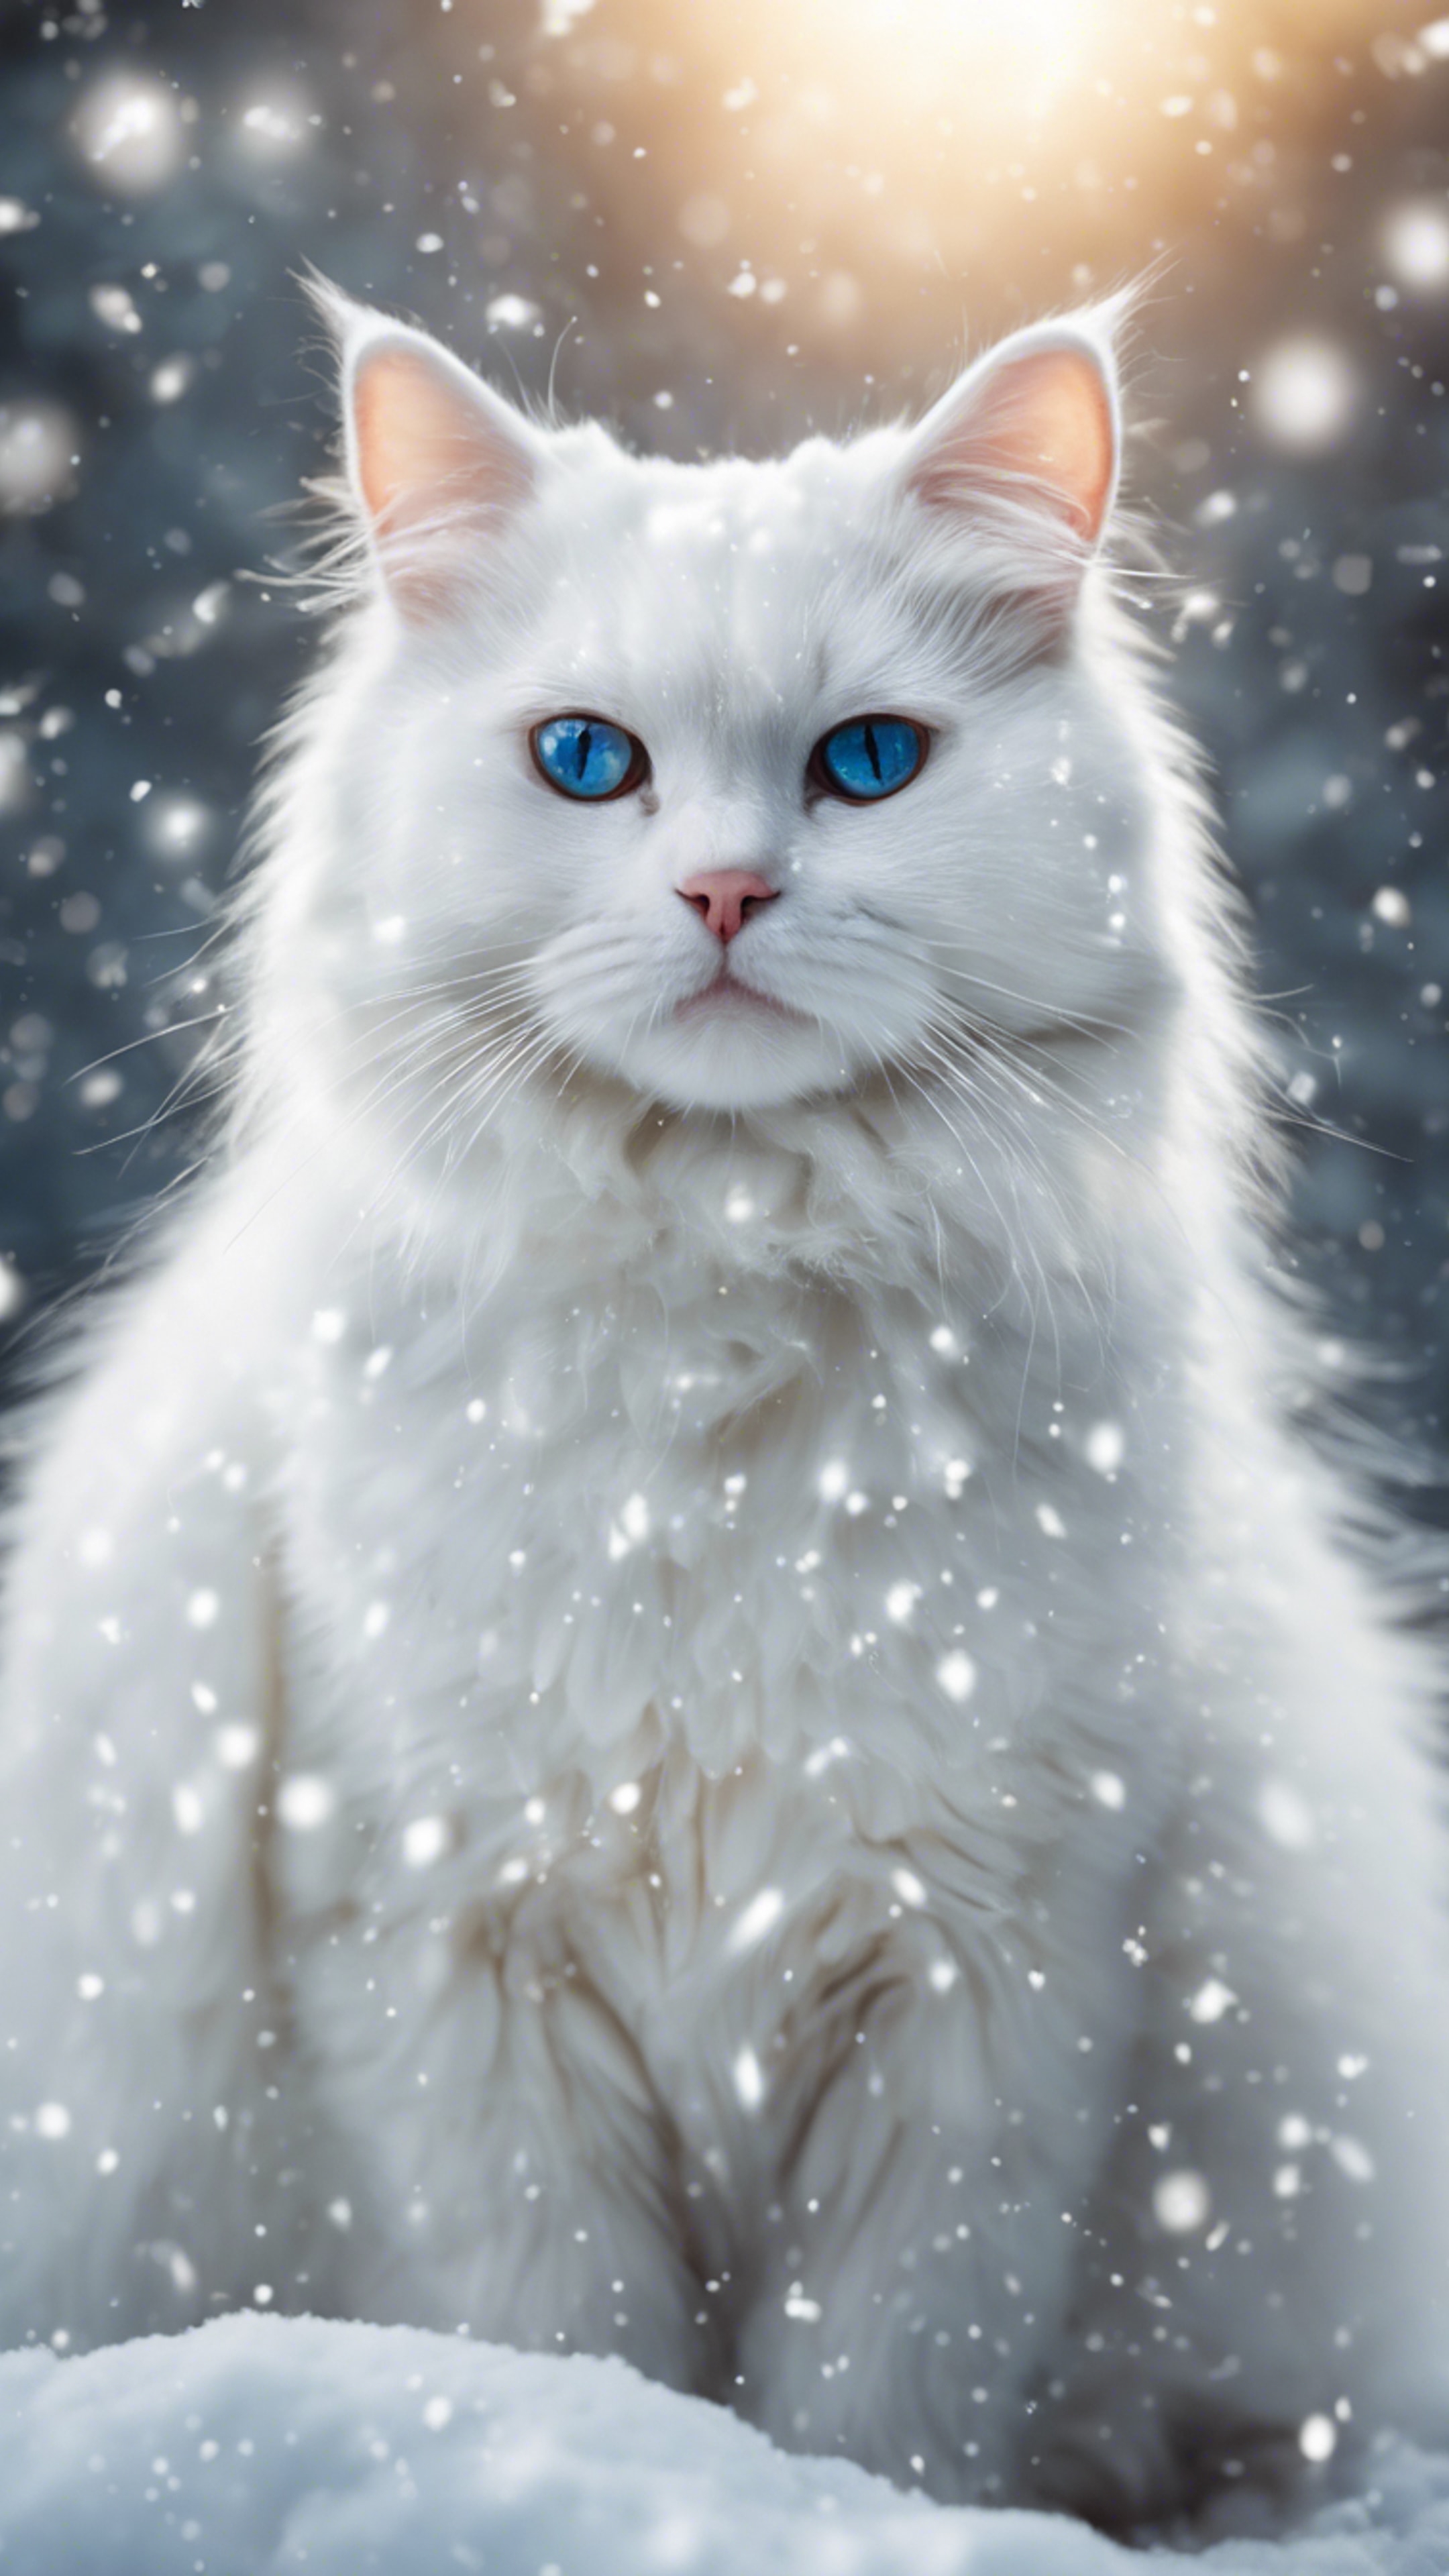 A fluffy white cat in the winter, amidst falling snowflakes. Wallpaper[a246cb8c0cd2485b96c3]